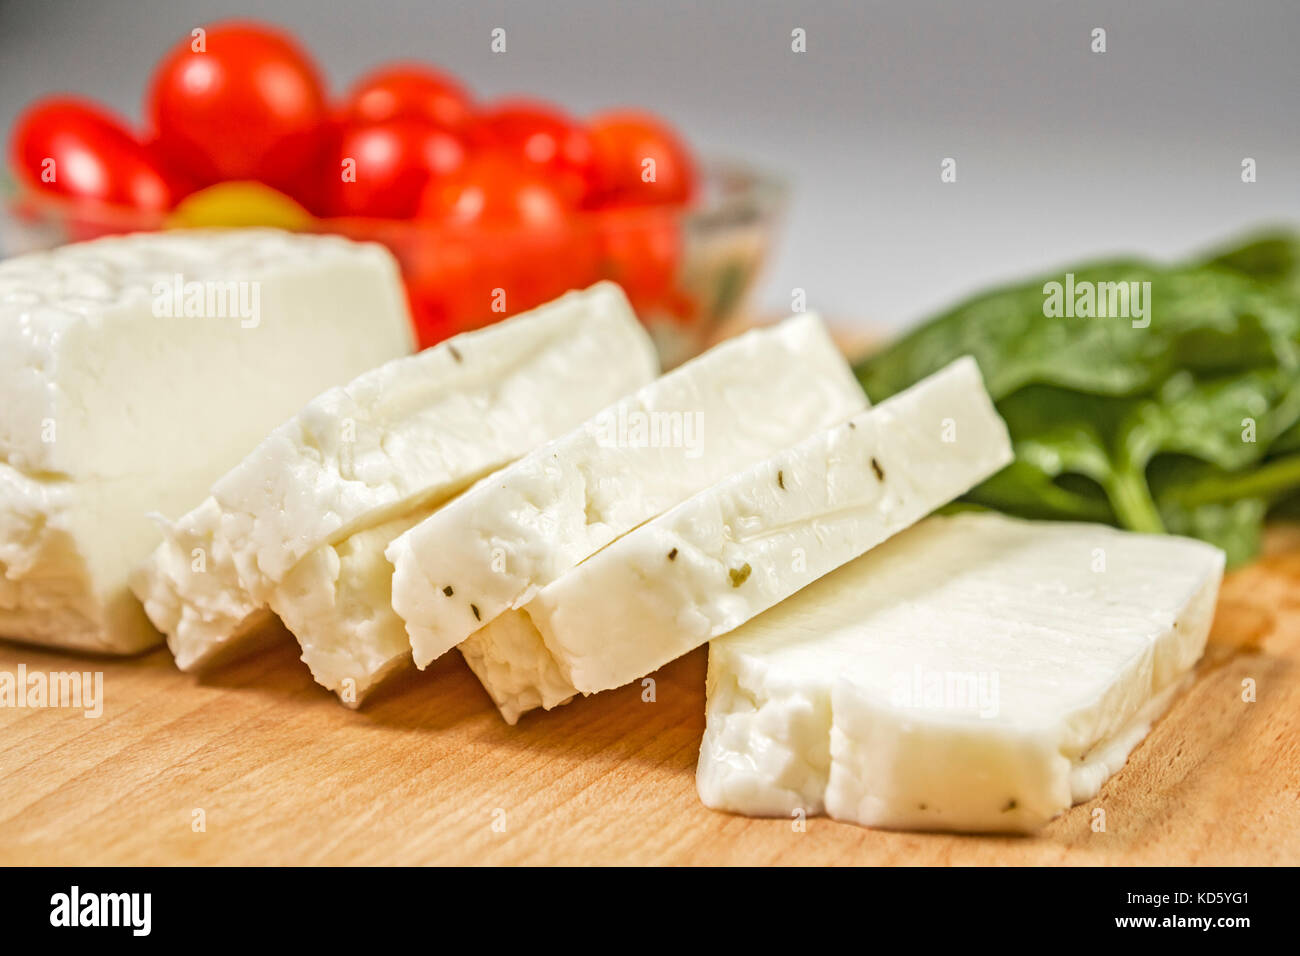 Fresh sliced halloumi cheese from Cyprus on a wooden board surface Stock Photo